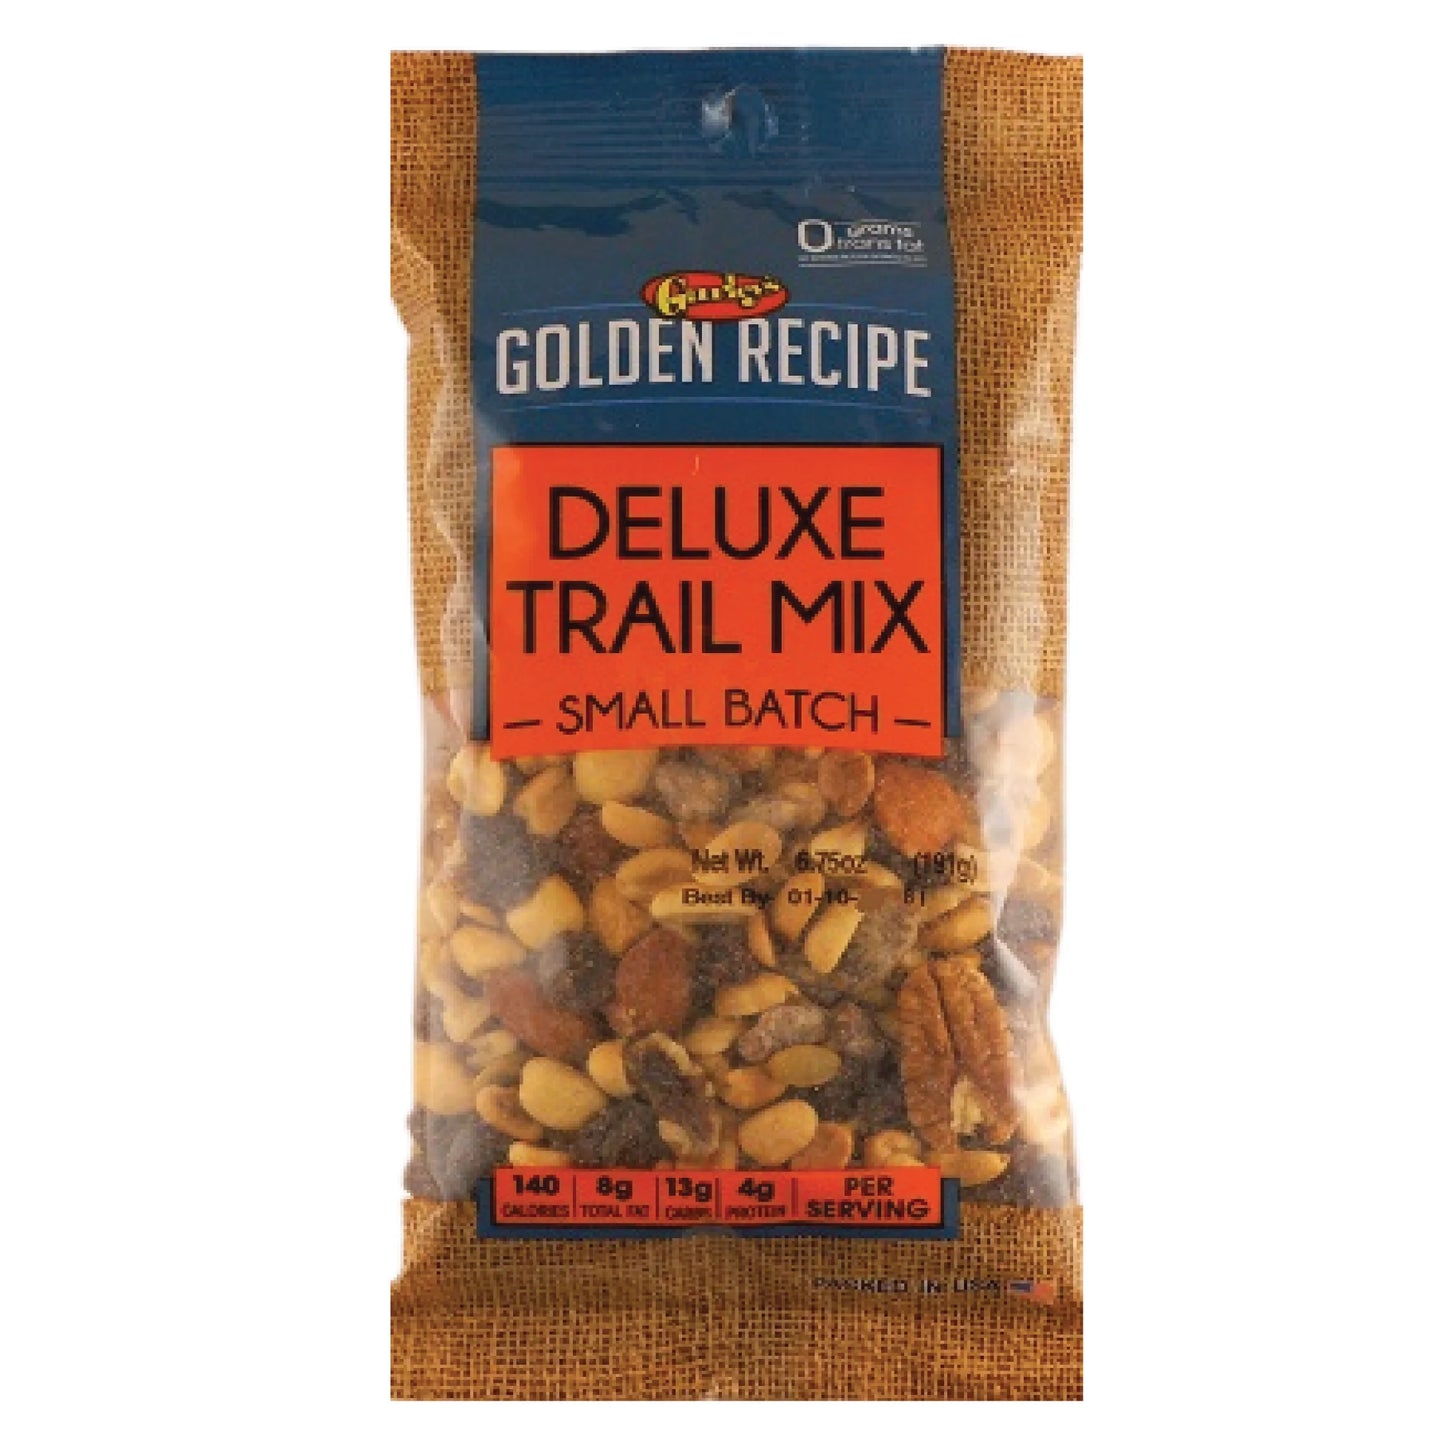 Gurley’s Golden Recipe Deluxe Trail Mix Small Batch 6oz (Pack of 8)